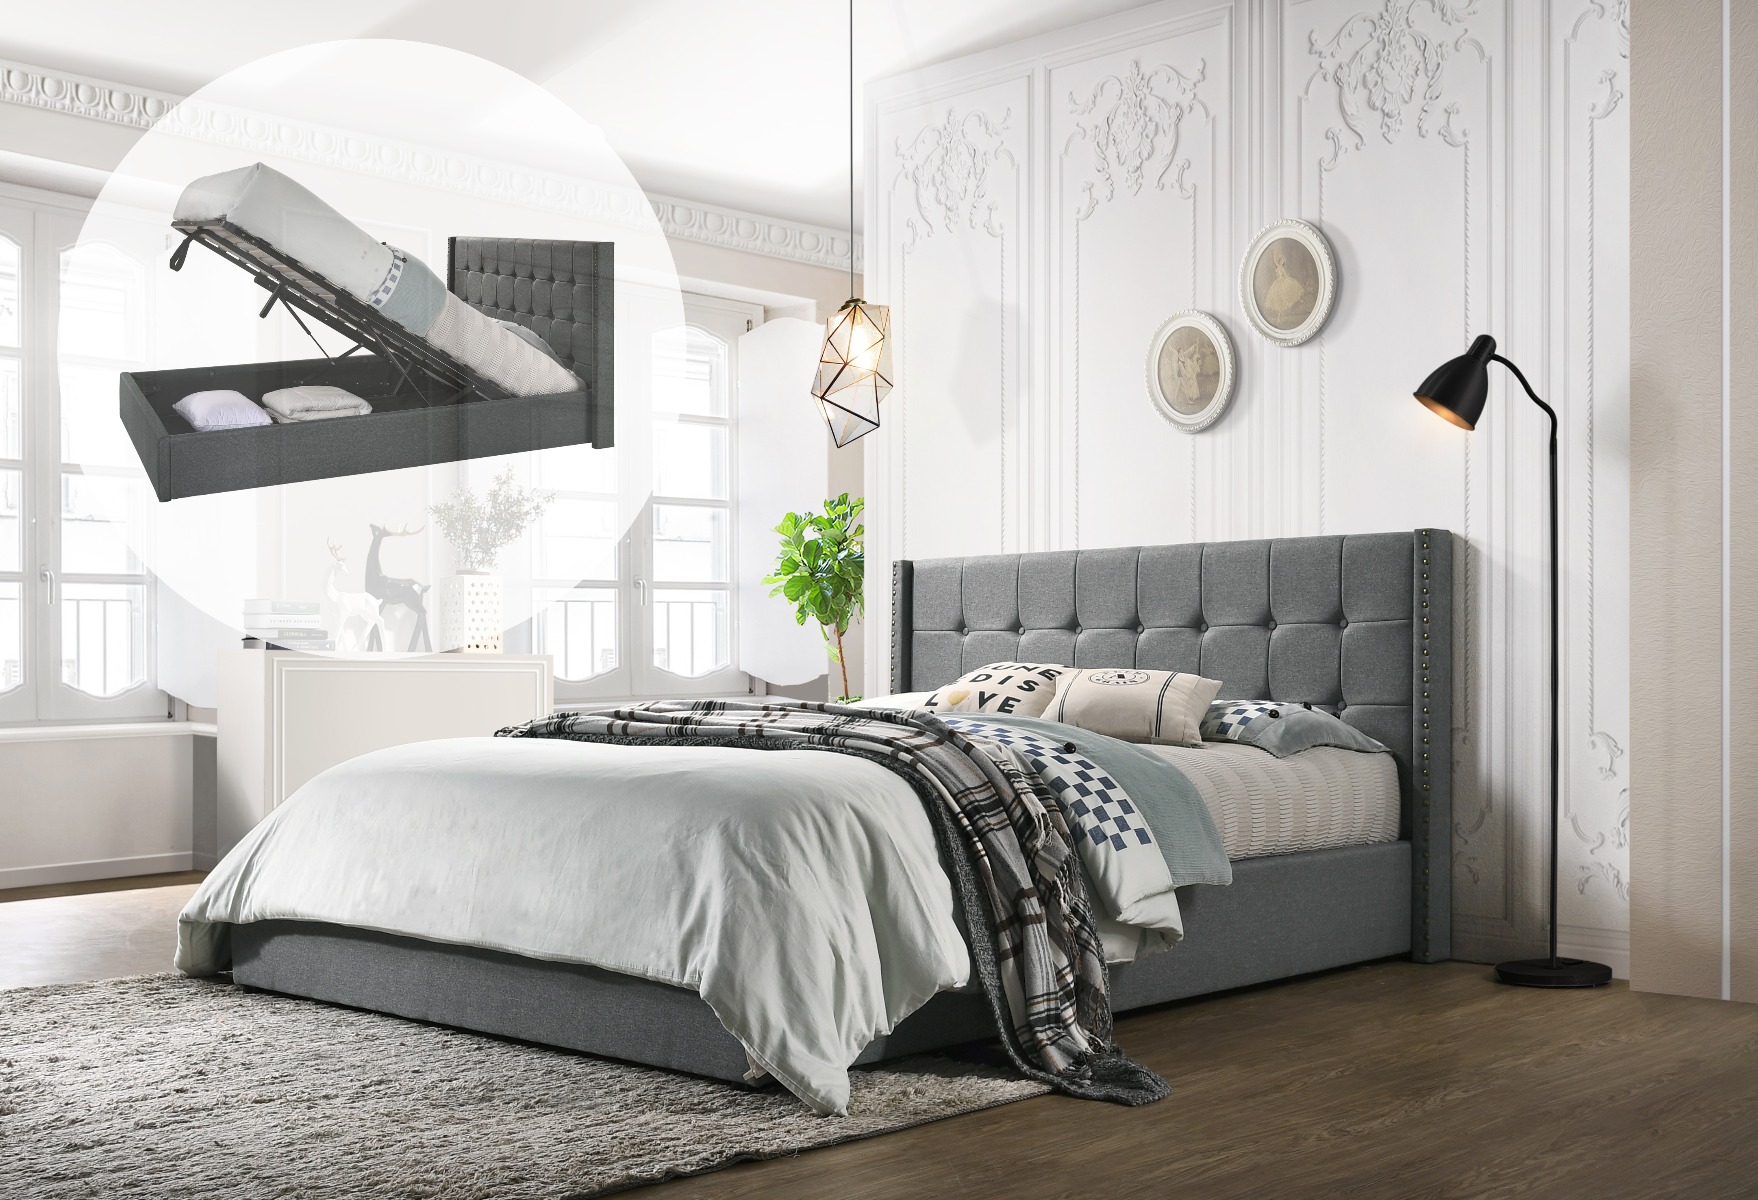 King Sized Winged Fabric Bed Frame With, King Bed Frame Melbourne